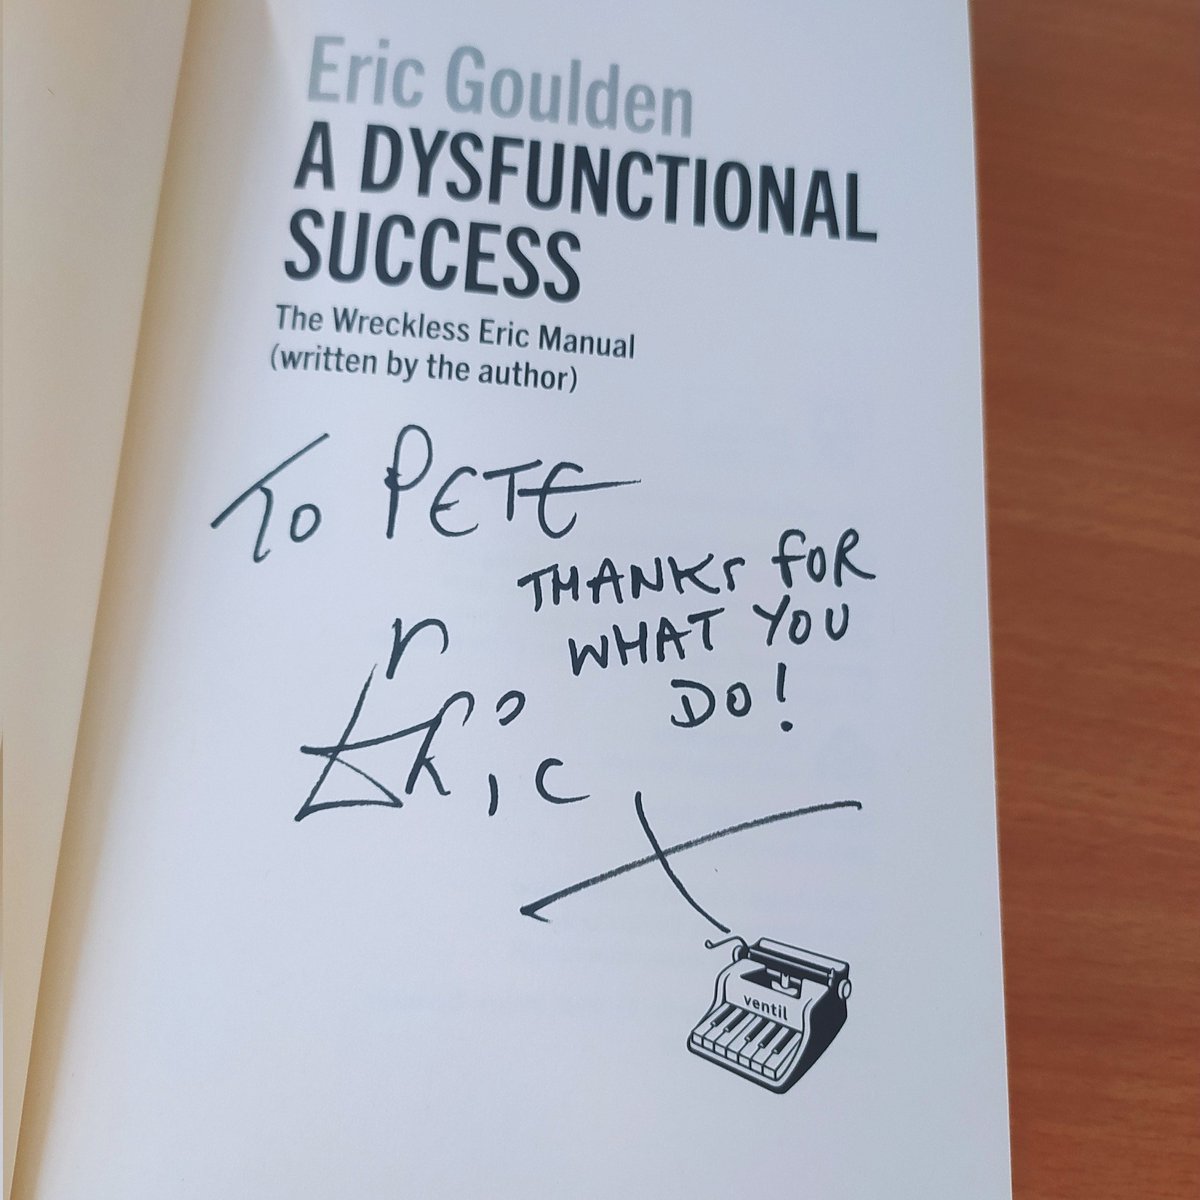 Wreckless Eric (Eric Goulden) republishes his long unavailable memoir A Dysfunctional Success today with a new foreword. He kindly dropped off a signed one for me. Limited signed ones are available from @RoughTrade and @residentmusic